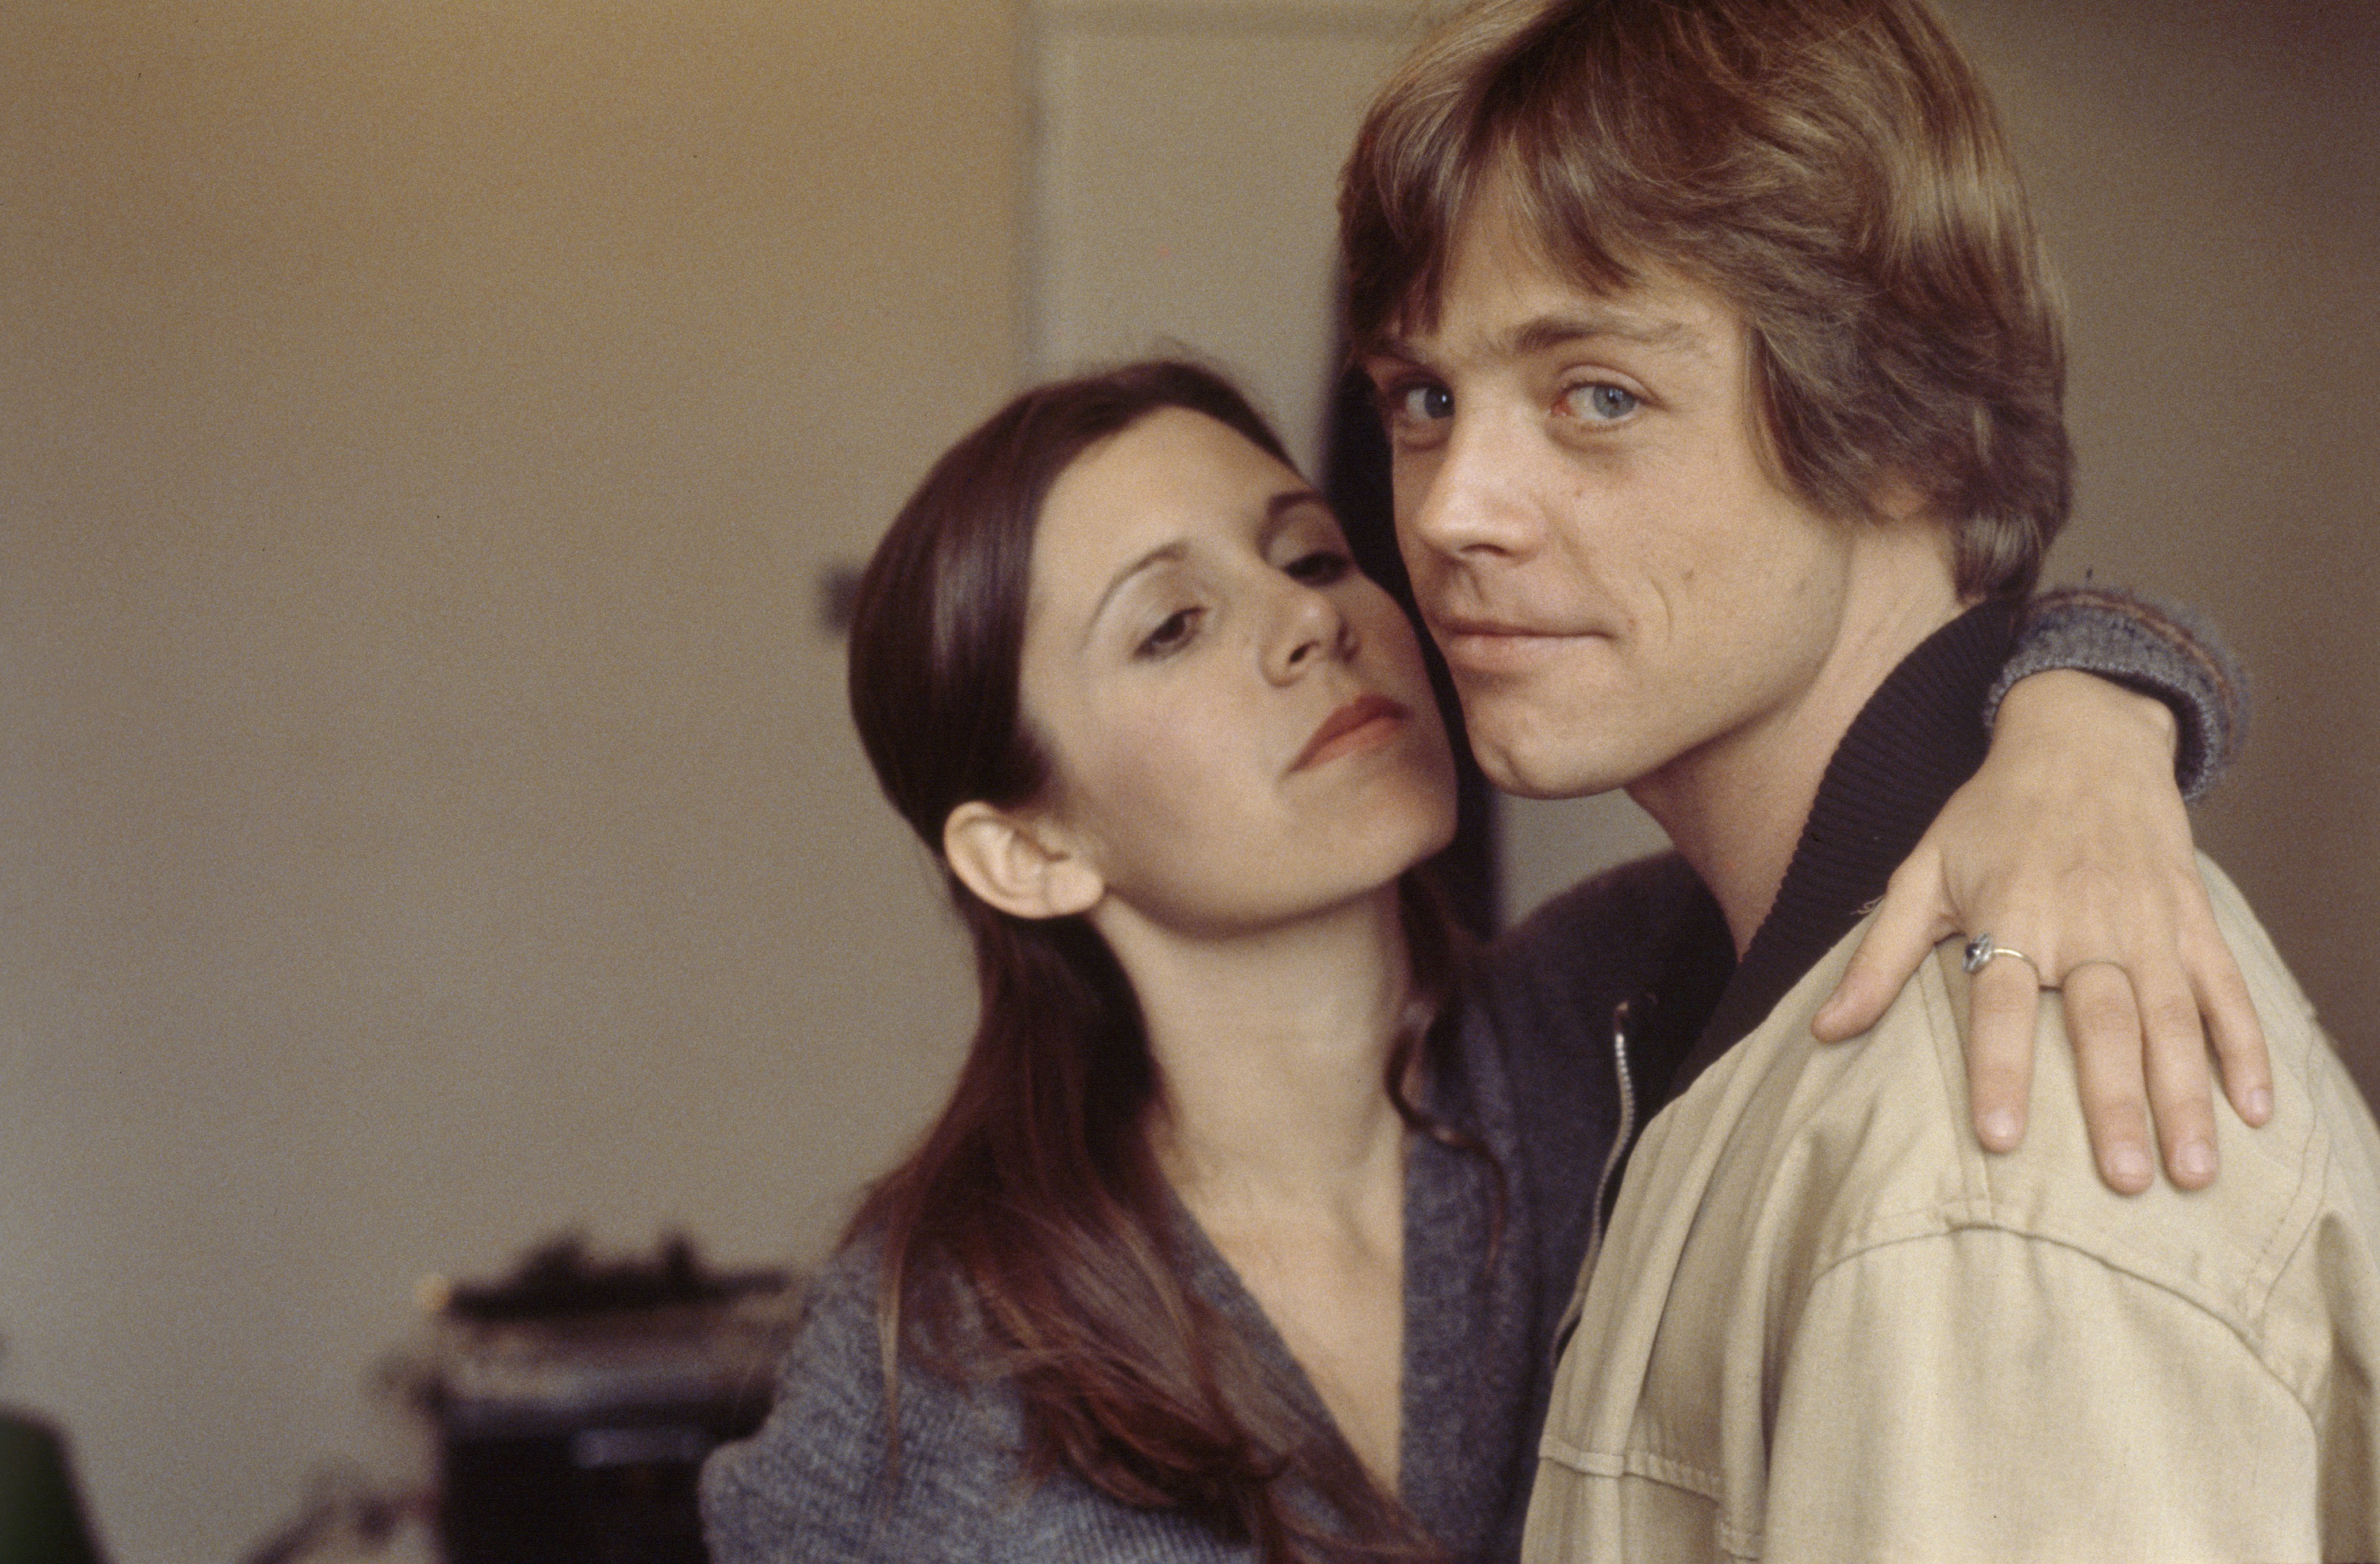 'Star Wars' actors Carrie Fisher and Mark Hamill